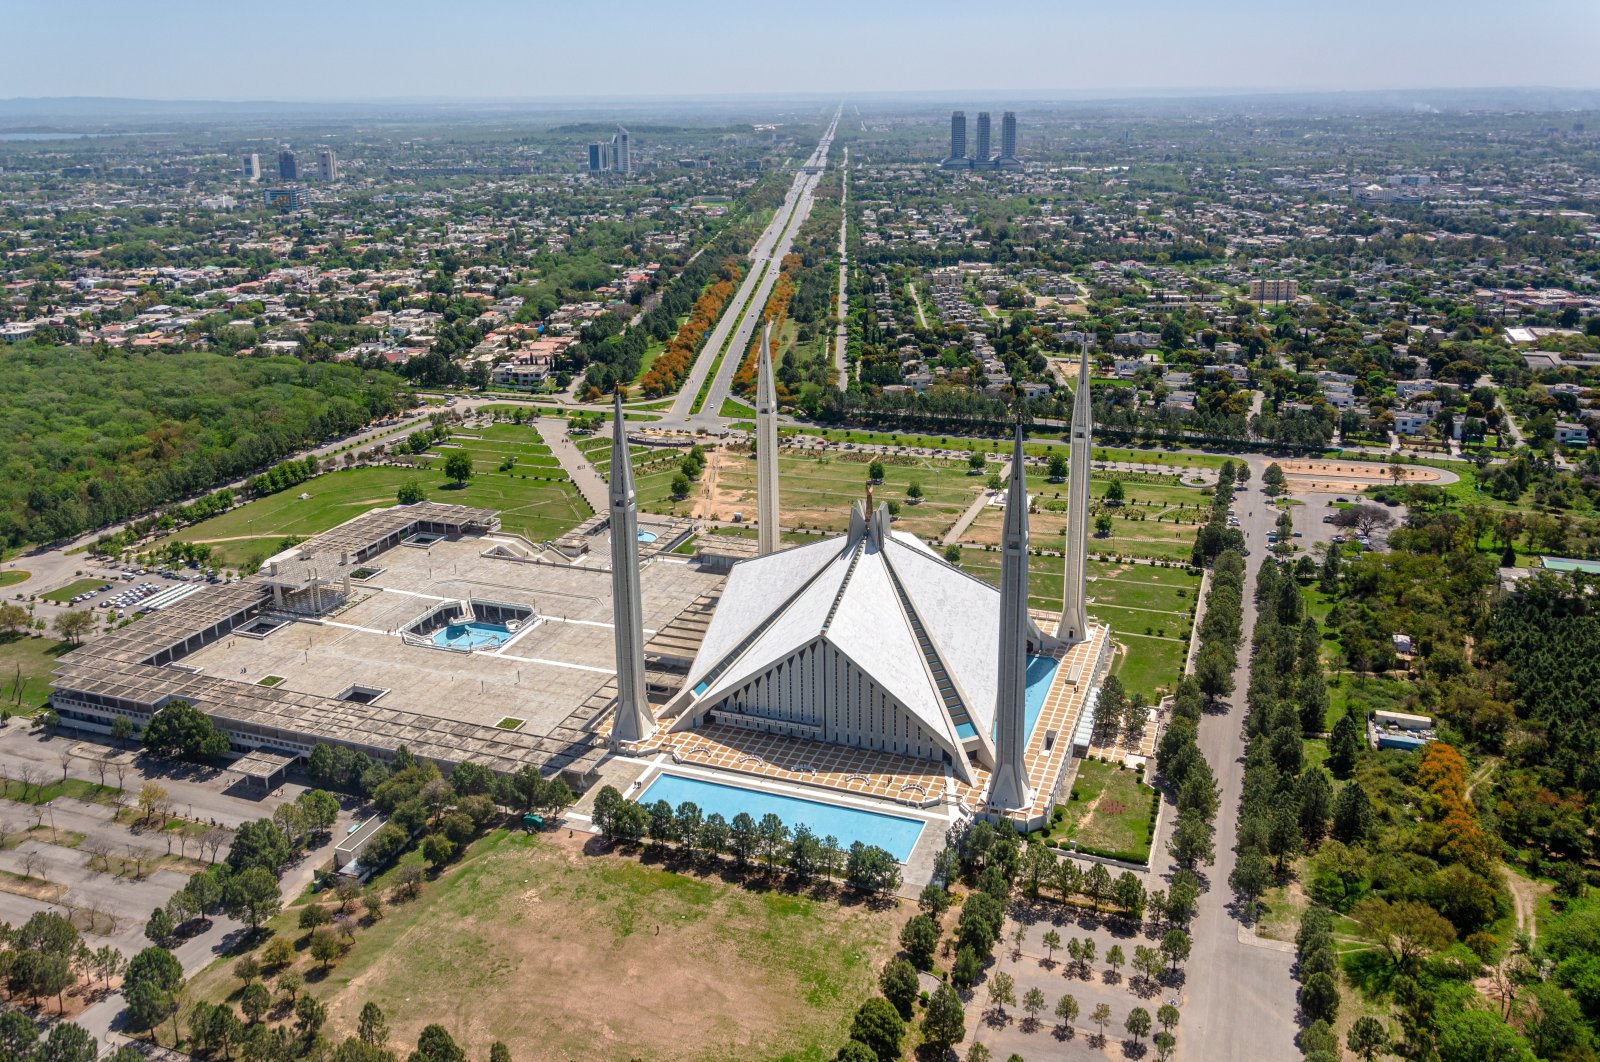 An aerial view of the Faisal Mosque, Islamabad, the capital of Pakistan. (Shutterstock)